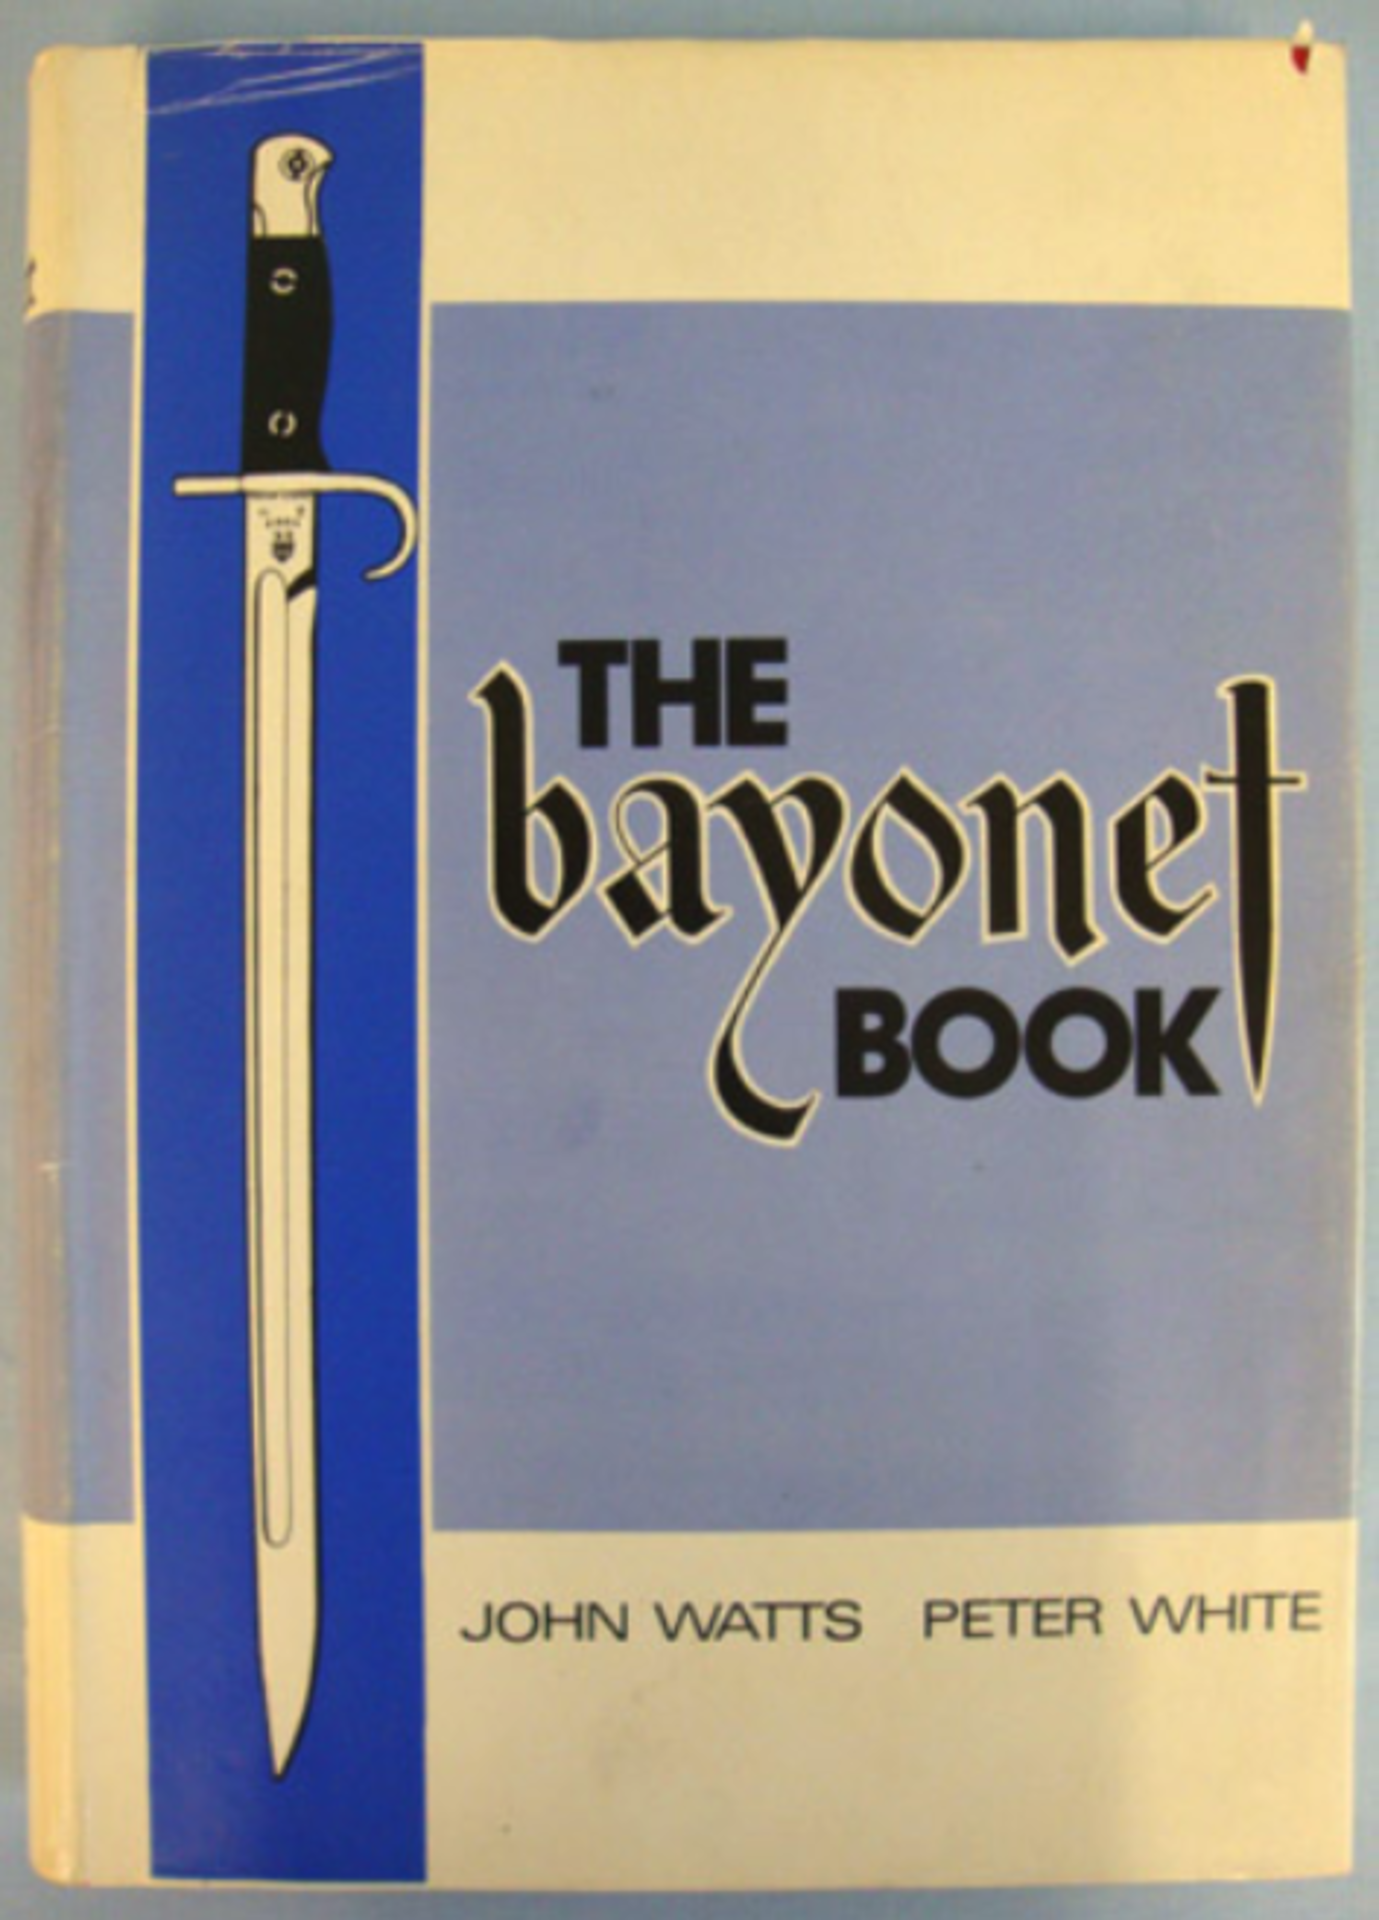 1st Edition 1975, Signed Copy, ' The Bayonet Book' by Watts and White.